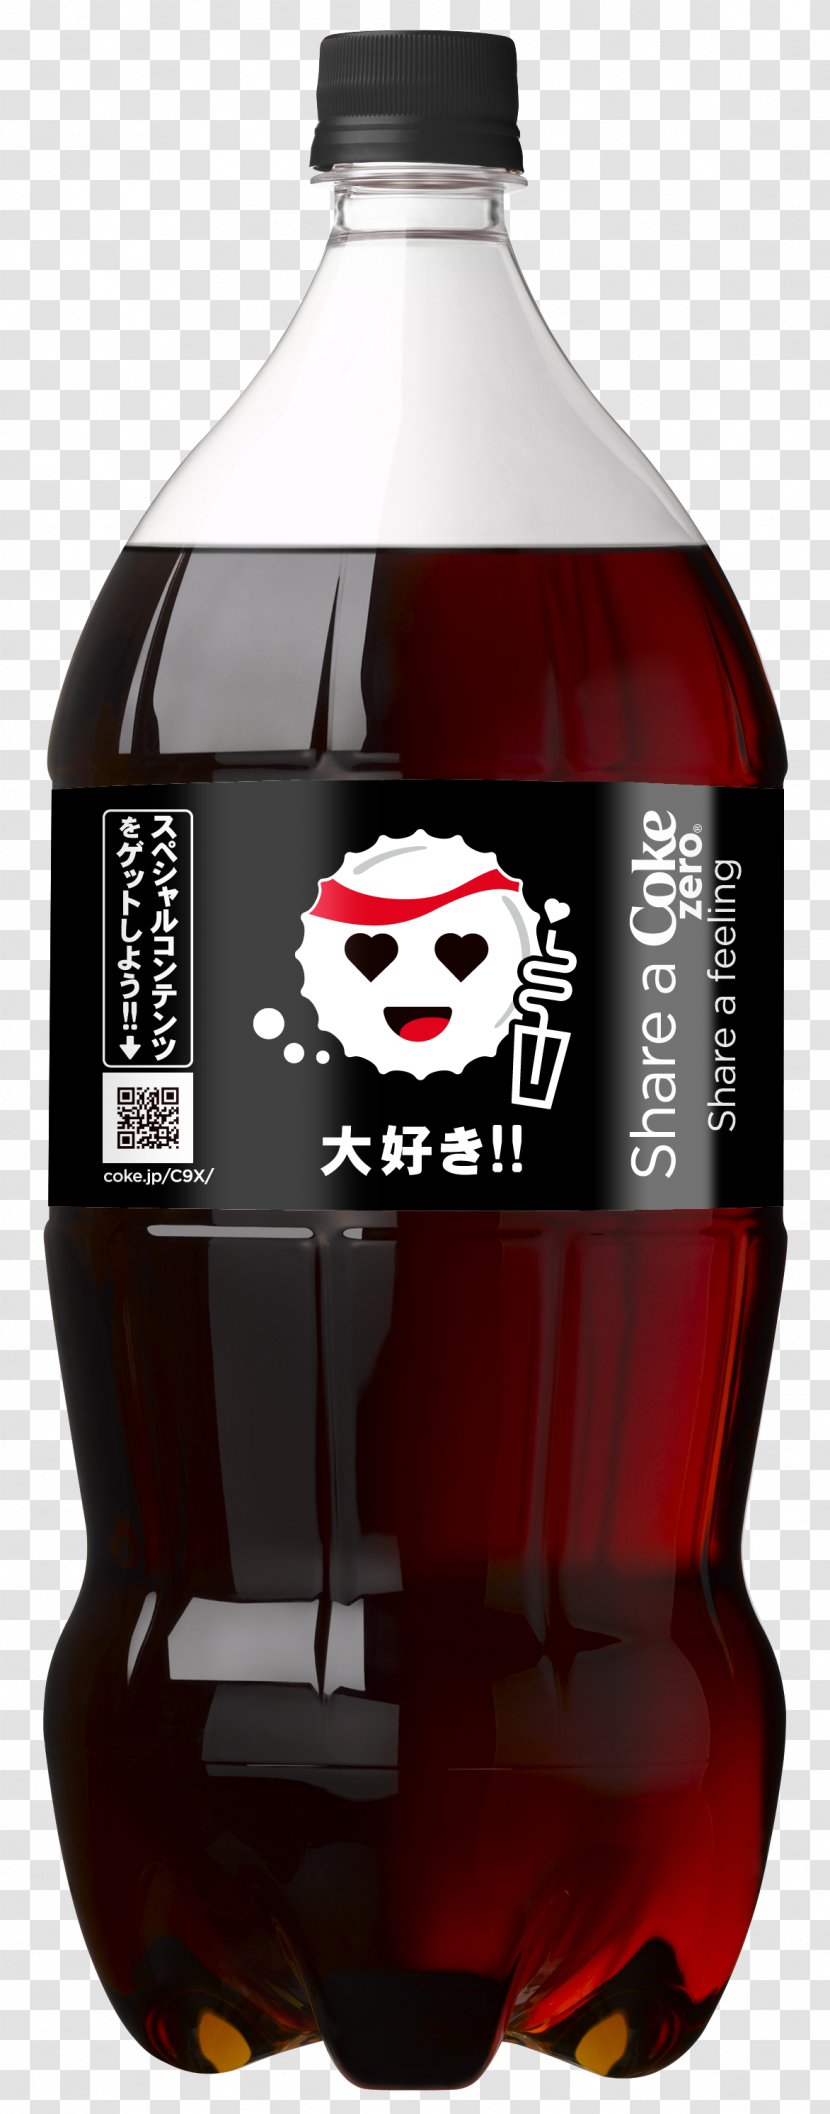 Coca-Cola Fizzy Drinks Bottle Carbonated Water - Food - News Center Transparent PNG